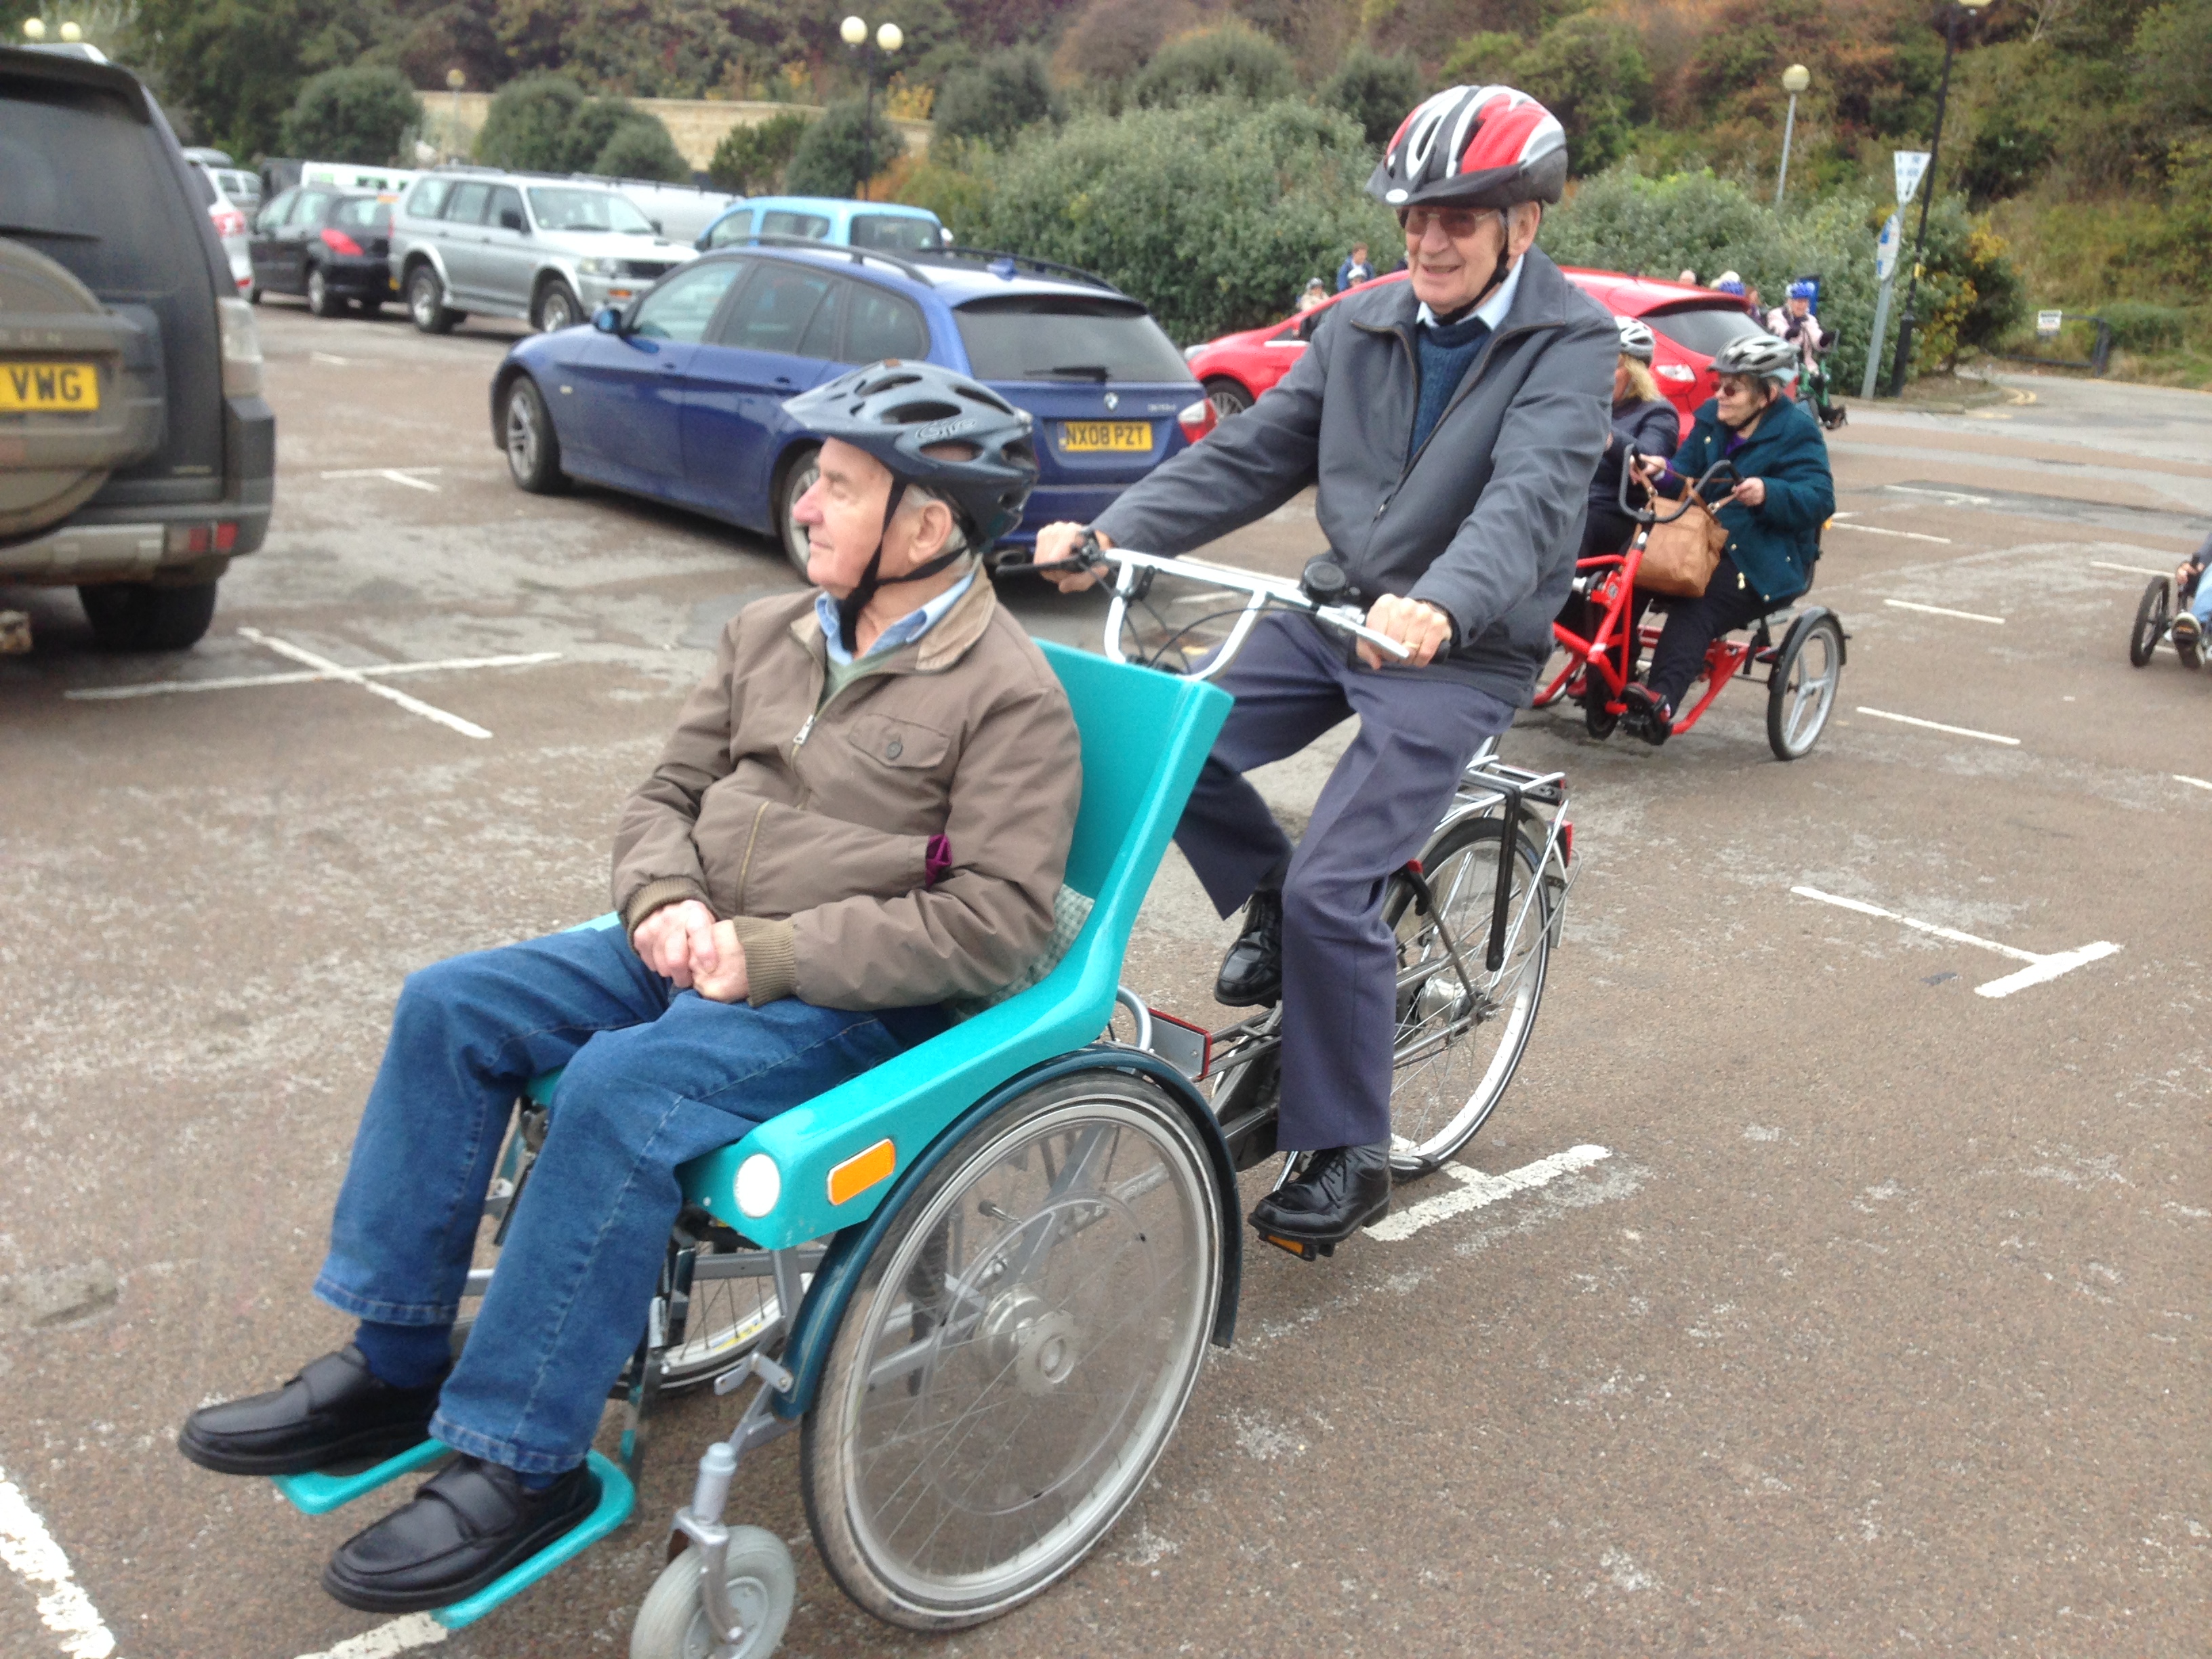 Scarborough and Ryedale Community Cycling - Inclusive Cycling Programme